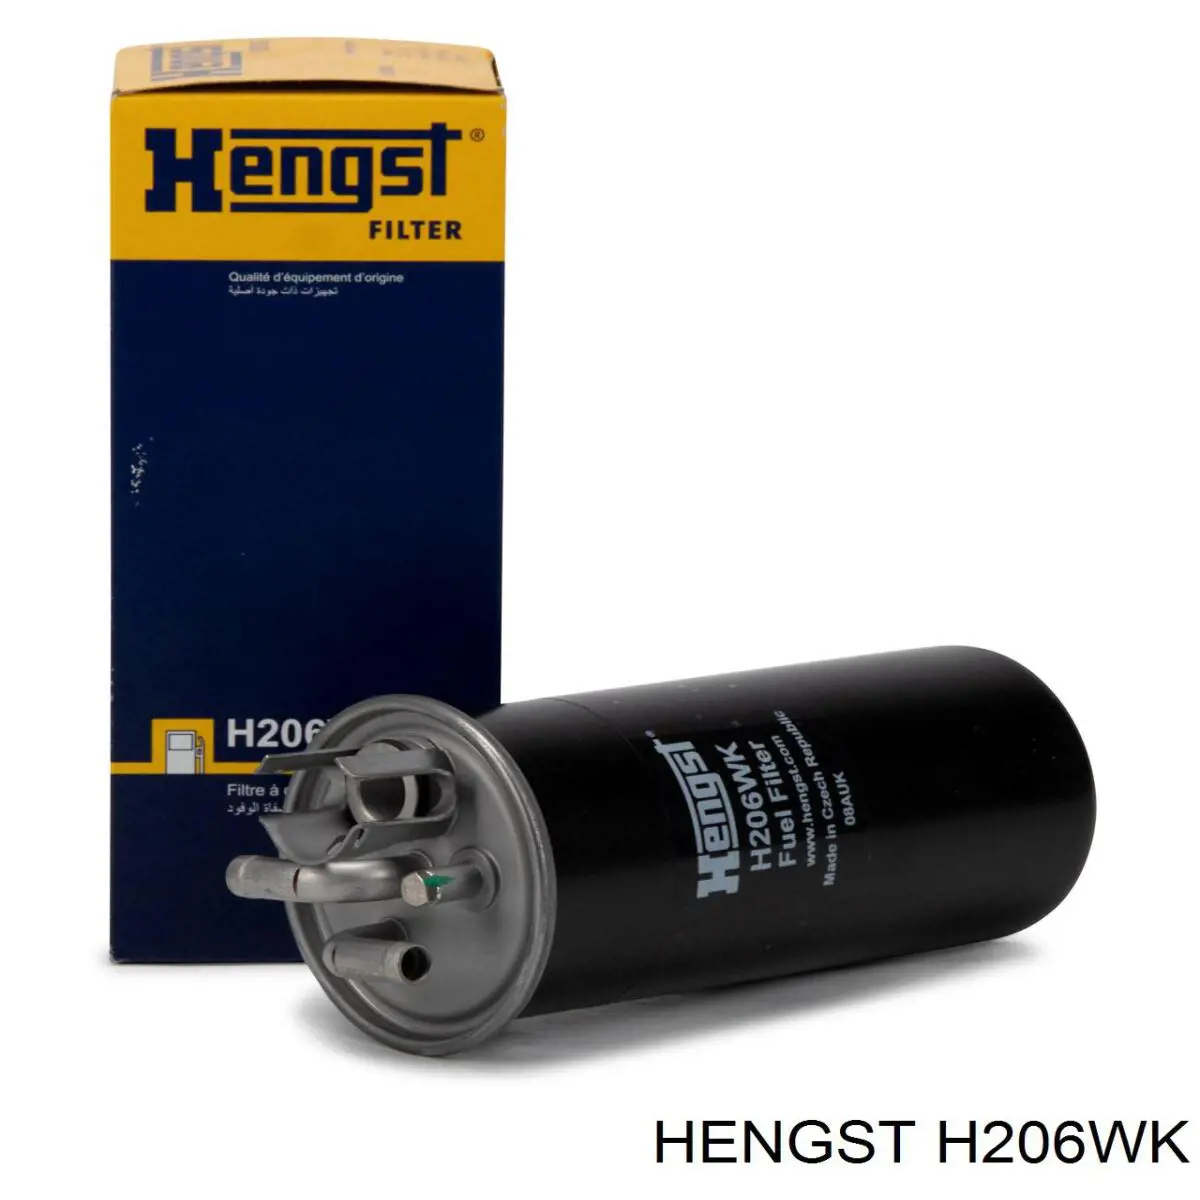 Filtro combustible H206WK Hengst